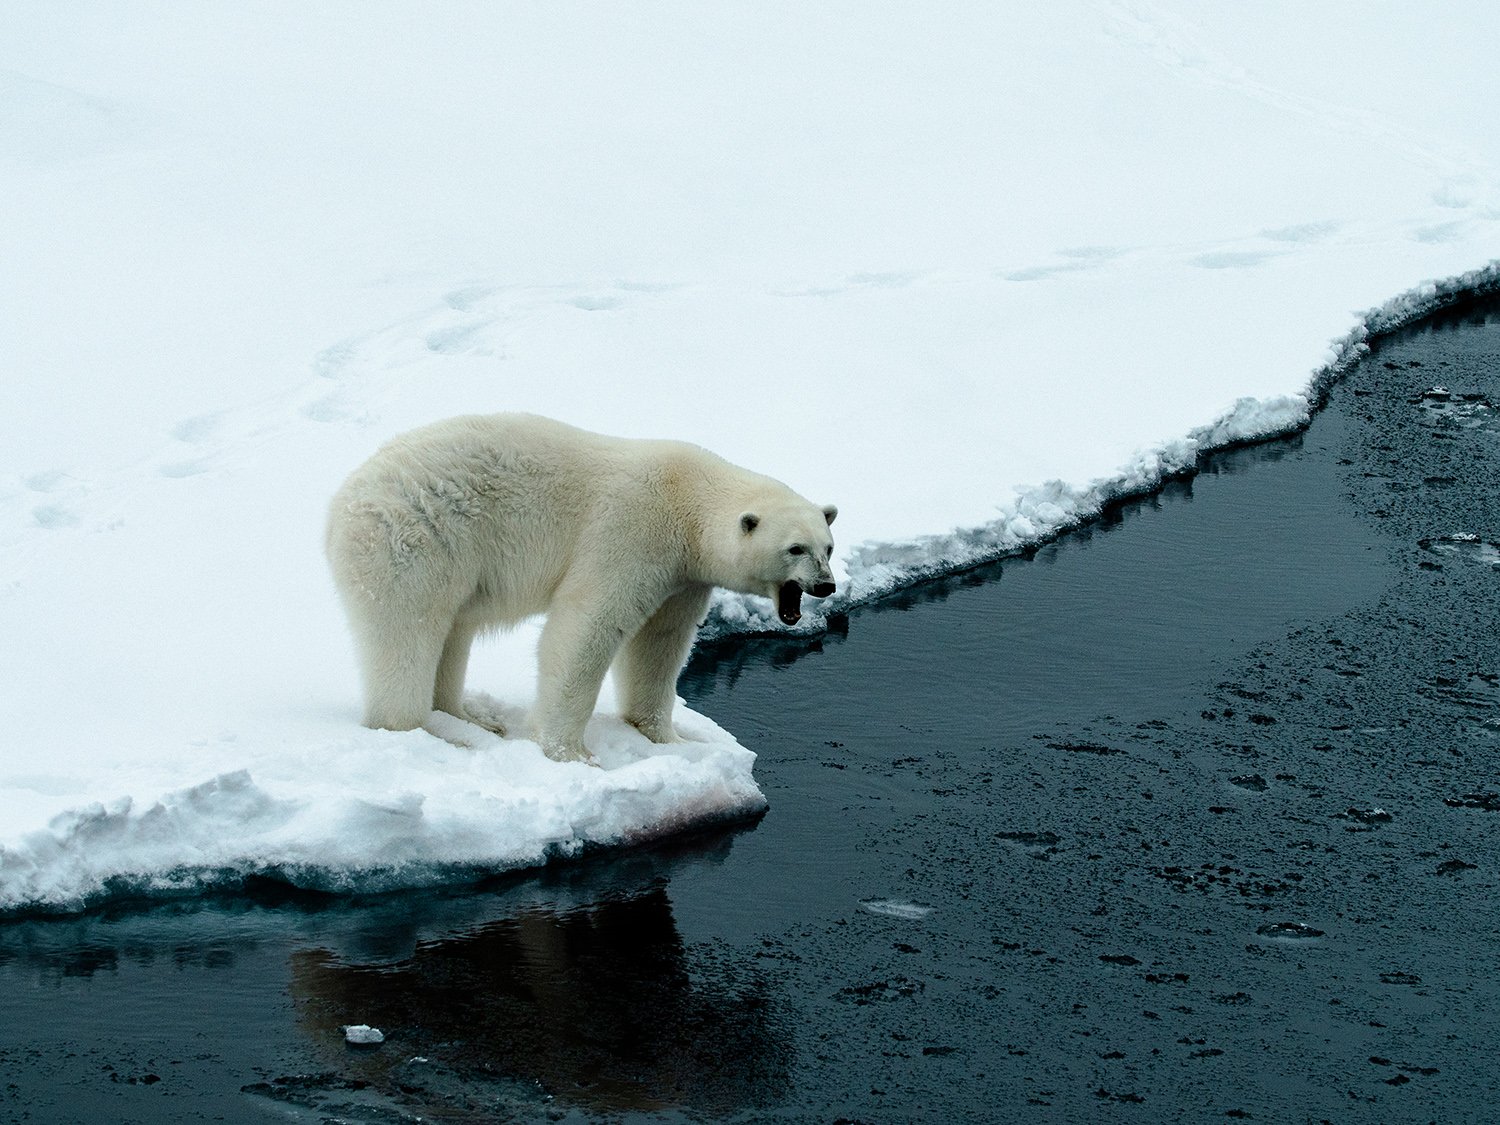 Should There be Polar Bears in Antarctica?